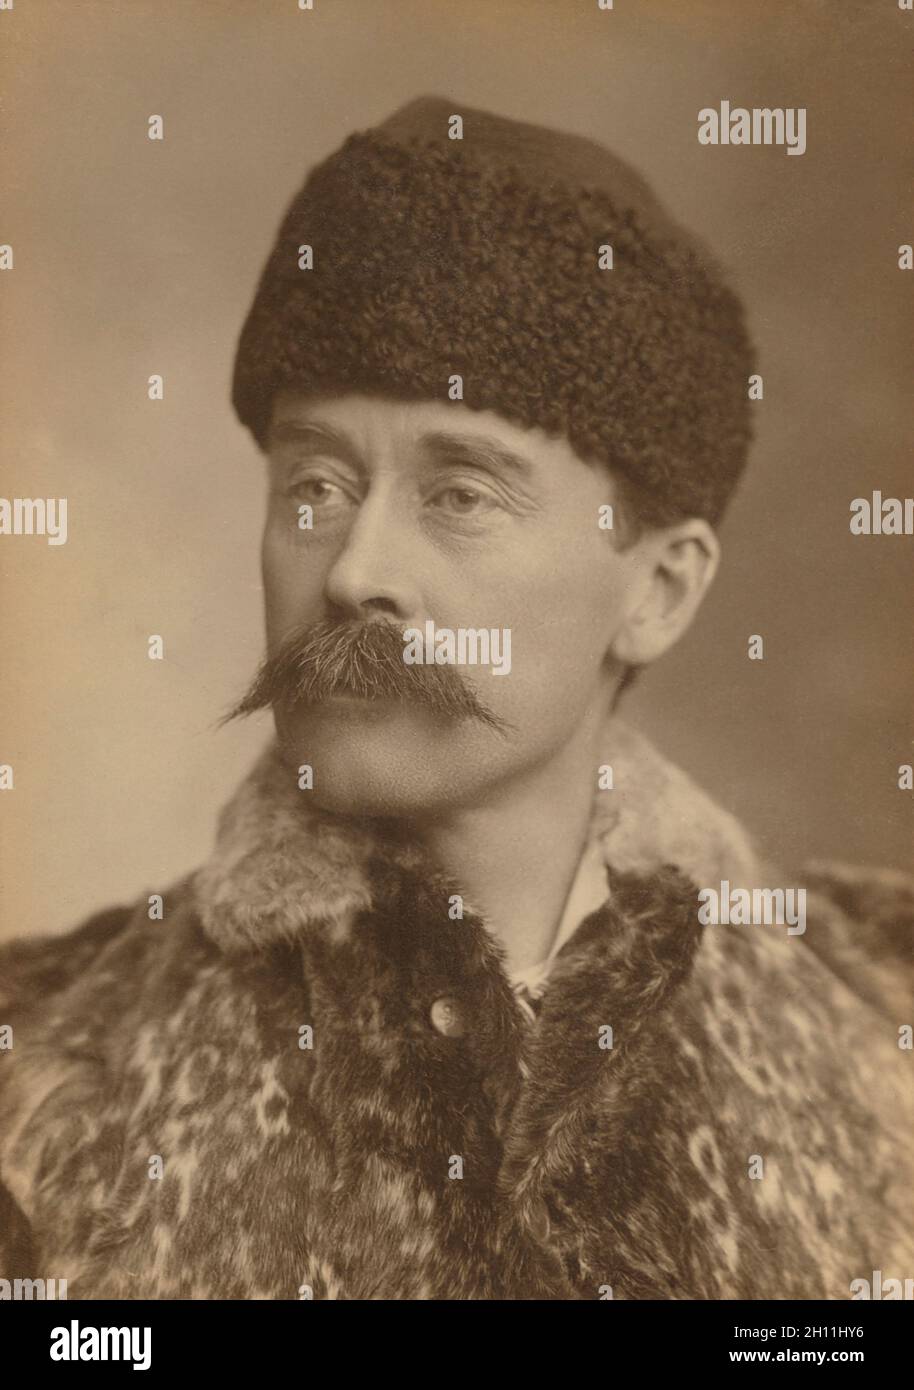 Robert E. Peary (1856-1920), American Explorer, Head and Shoules Ritratto, George N. Rockwood, 1896 Foto Stock